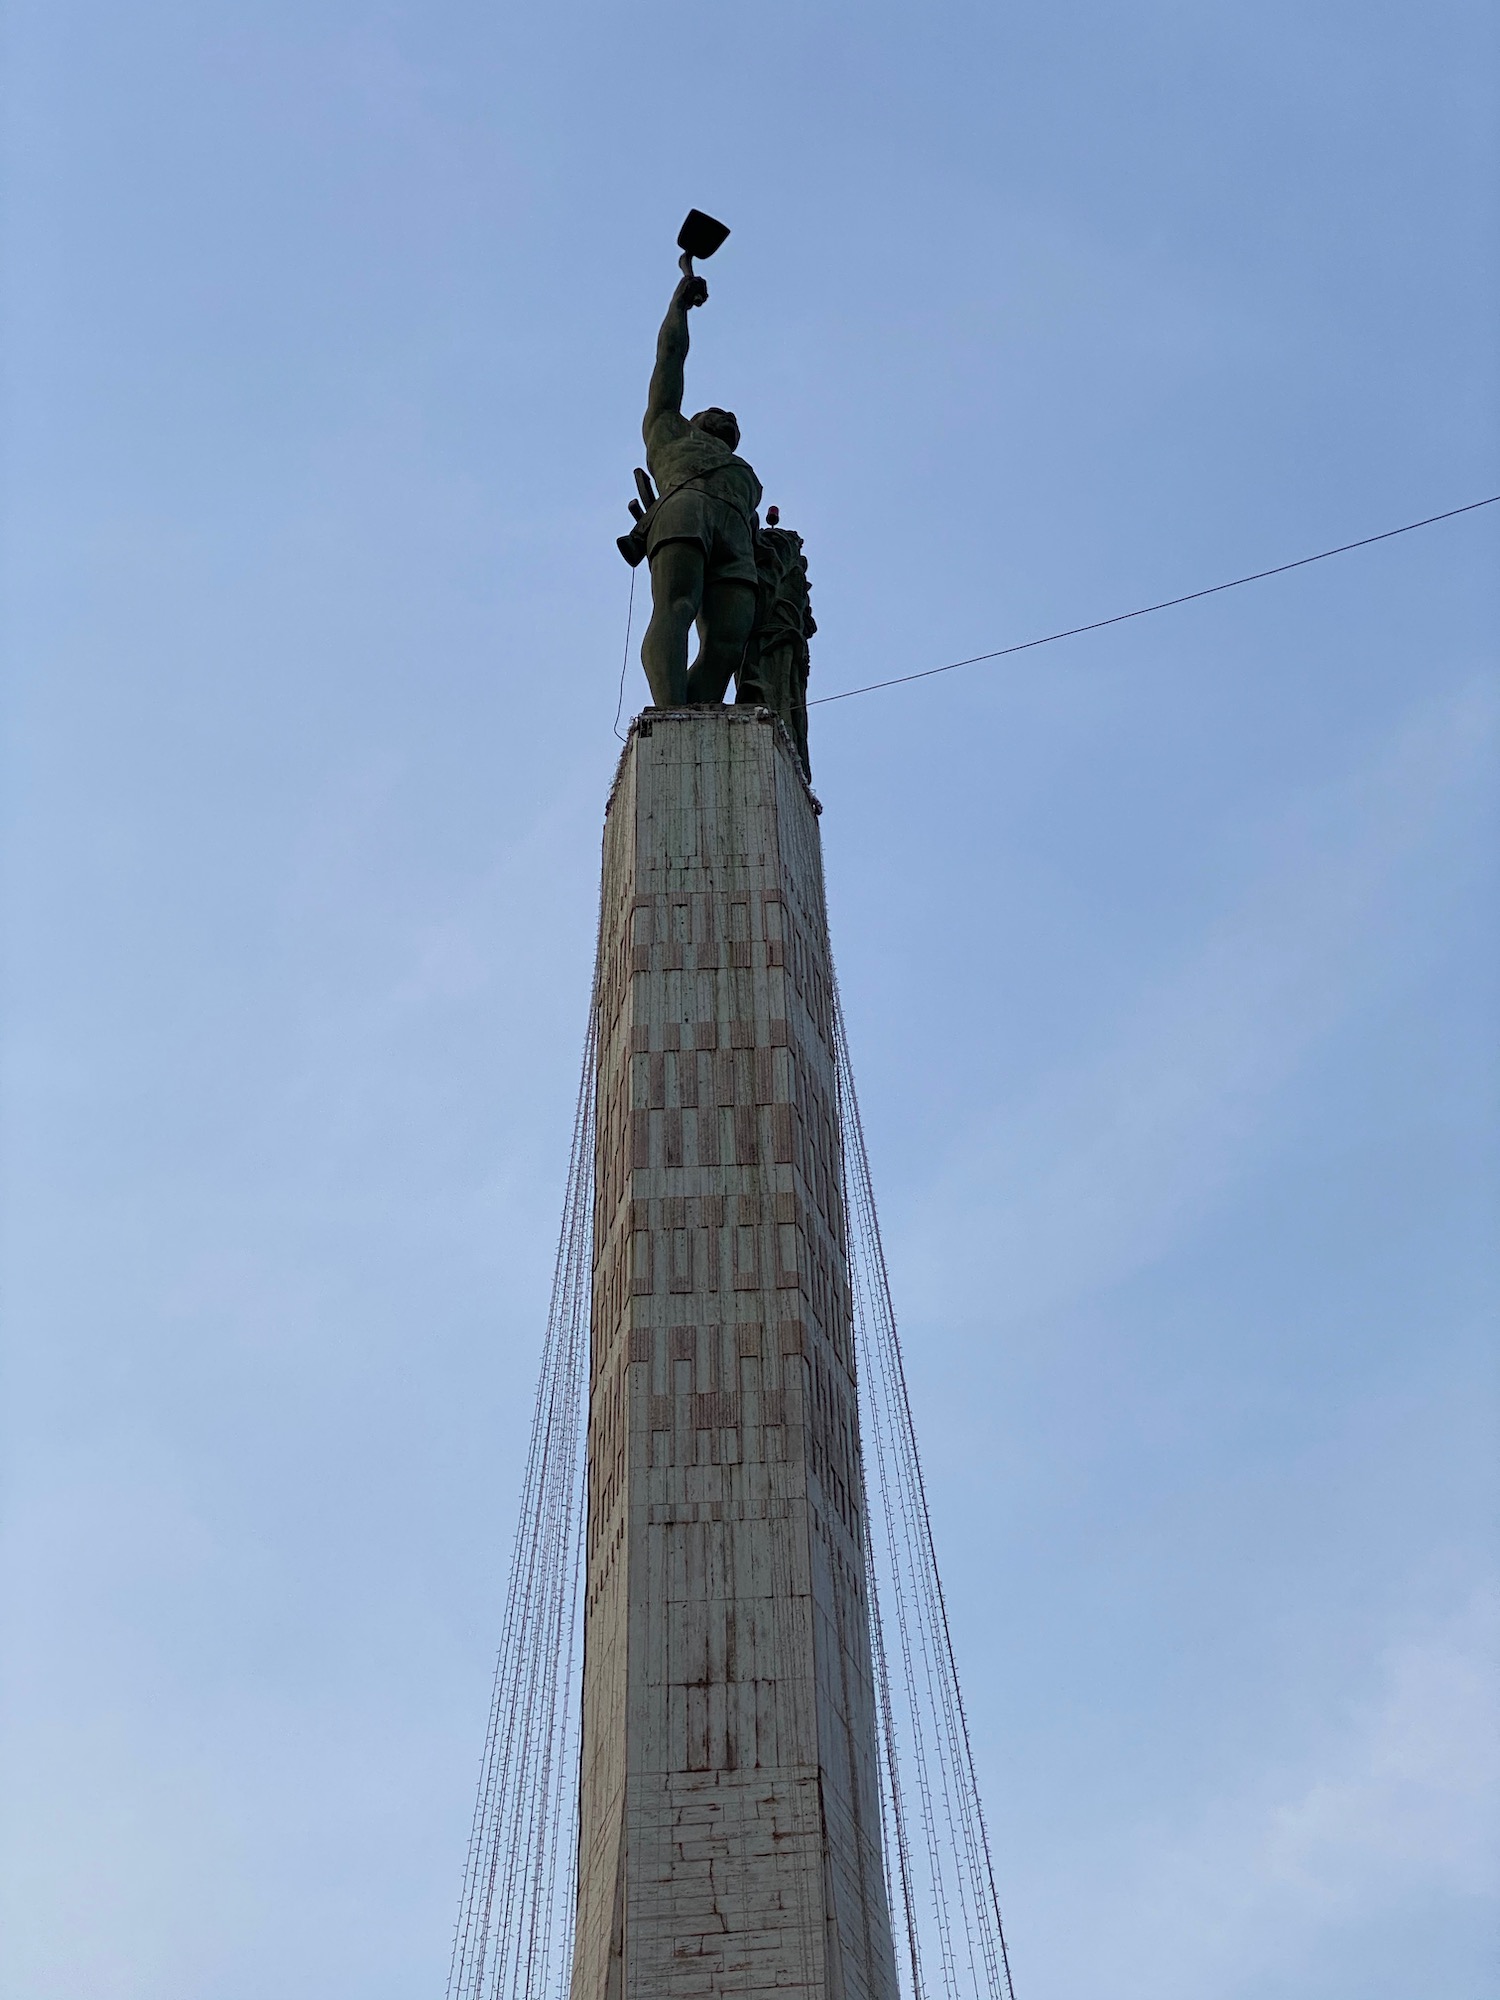 a statue on top of a tall tower